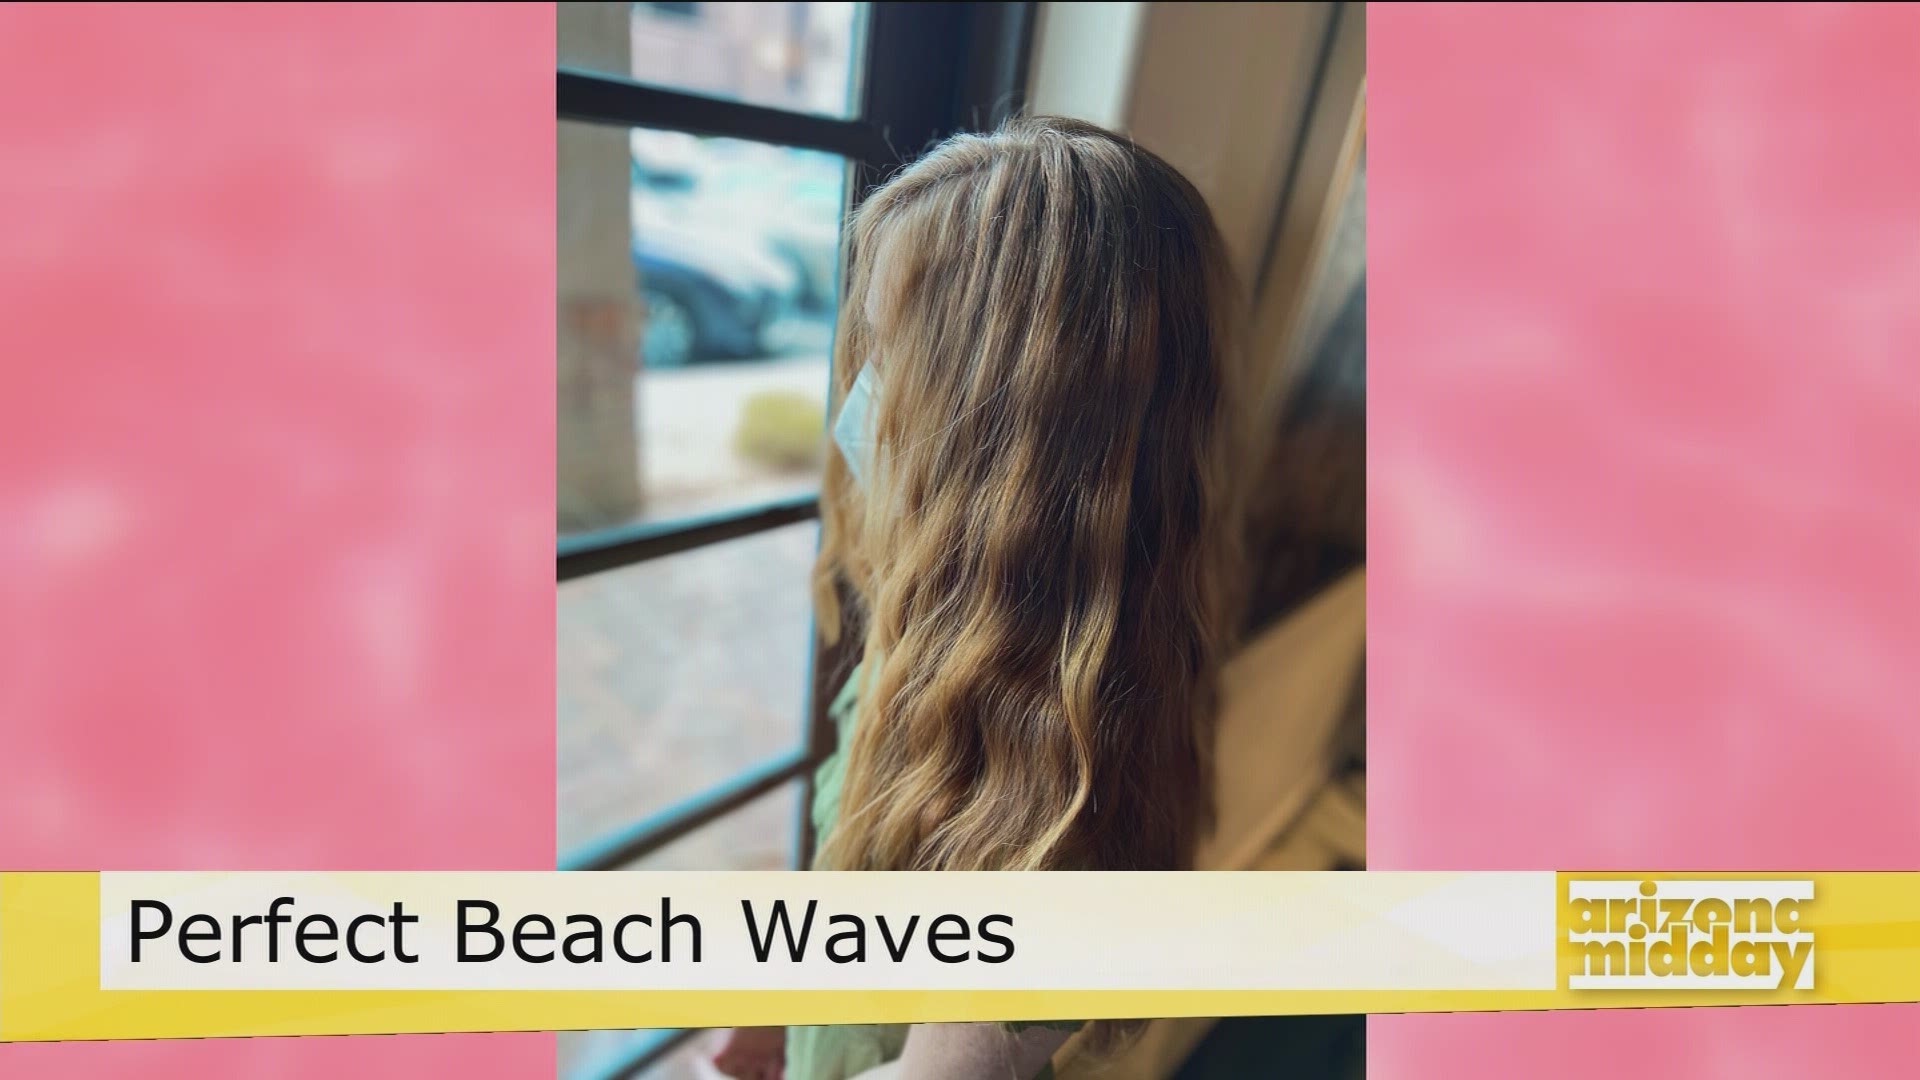 Veronica with BBV Salon shows us how to use two different tools to re-create two different beach wave hairstyles